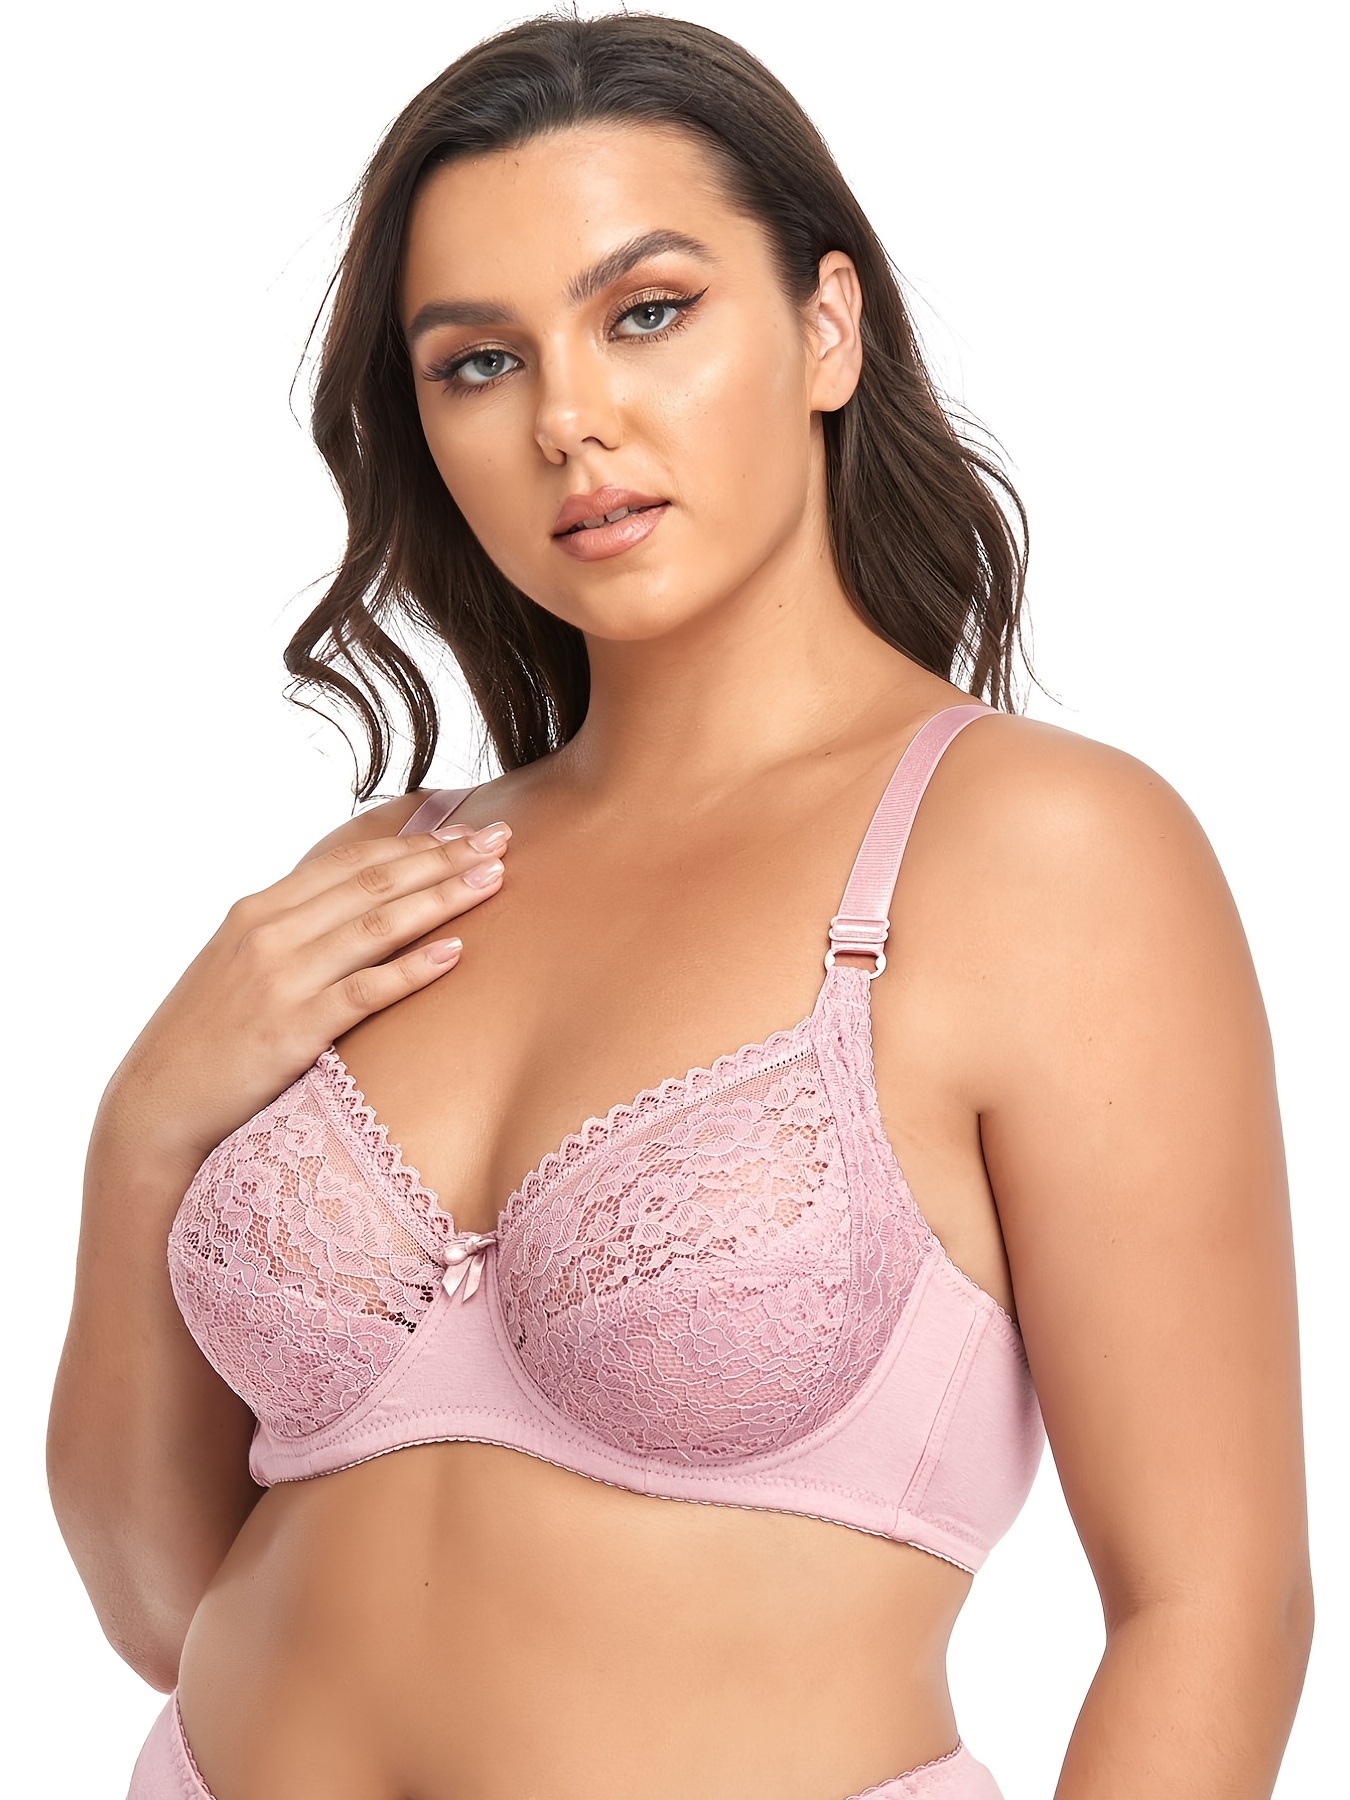 PariFairy Push Up Padded Bras for Women Lace Embroidery Plus Size